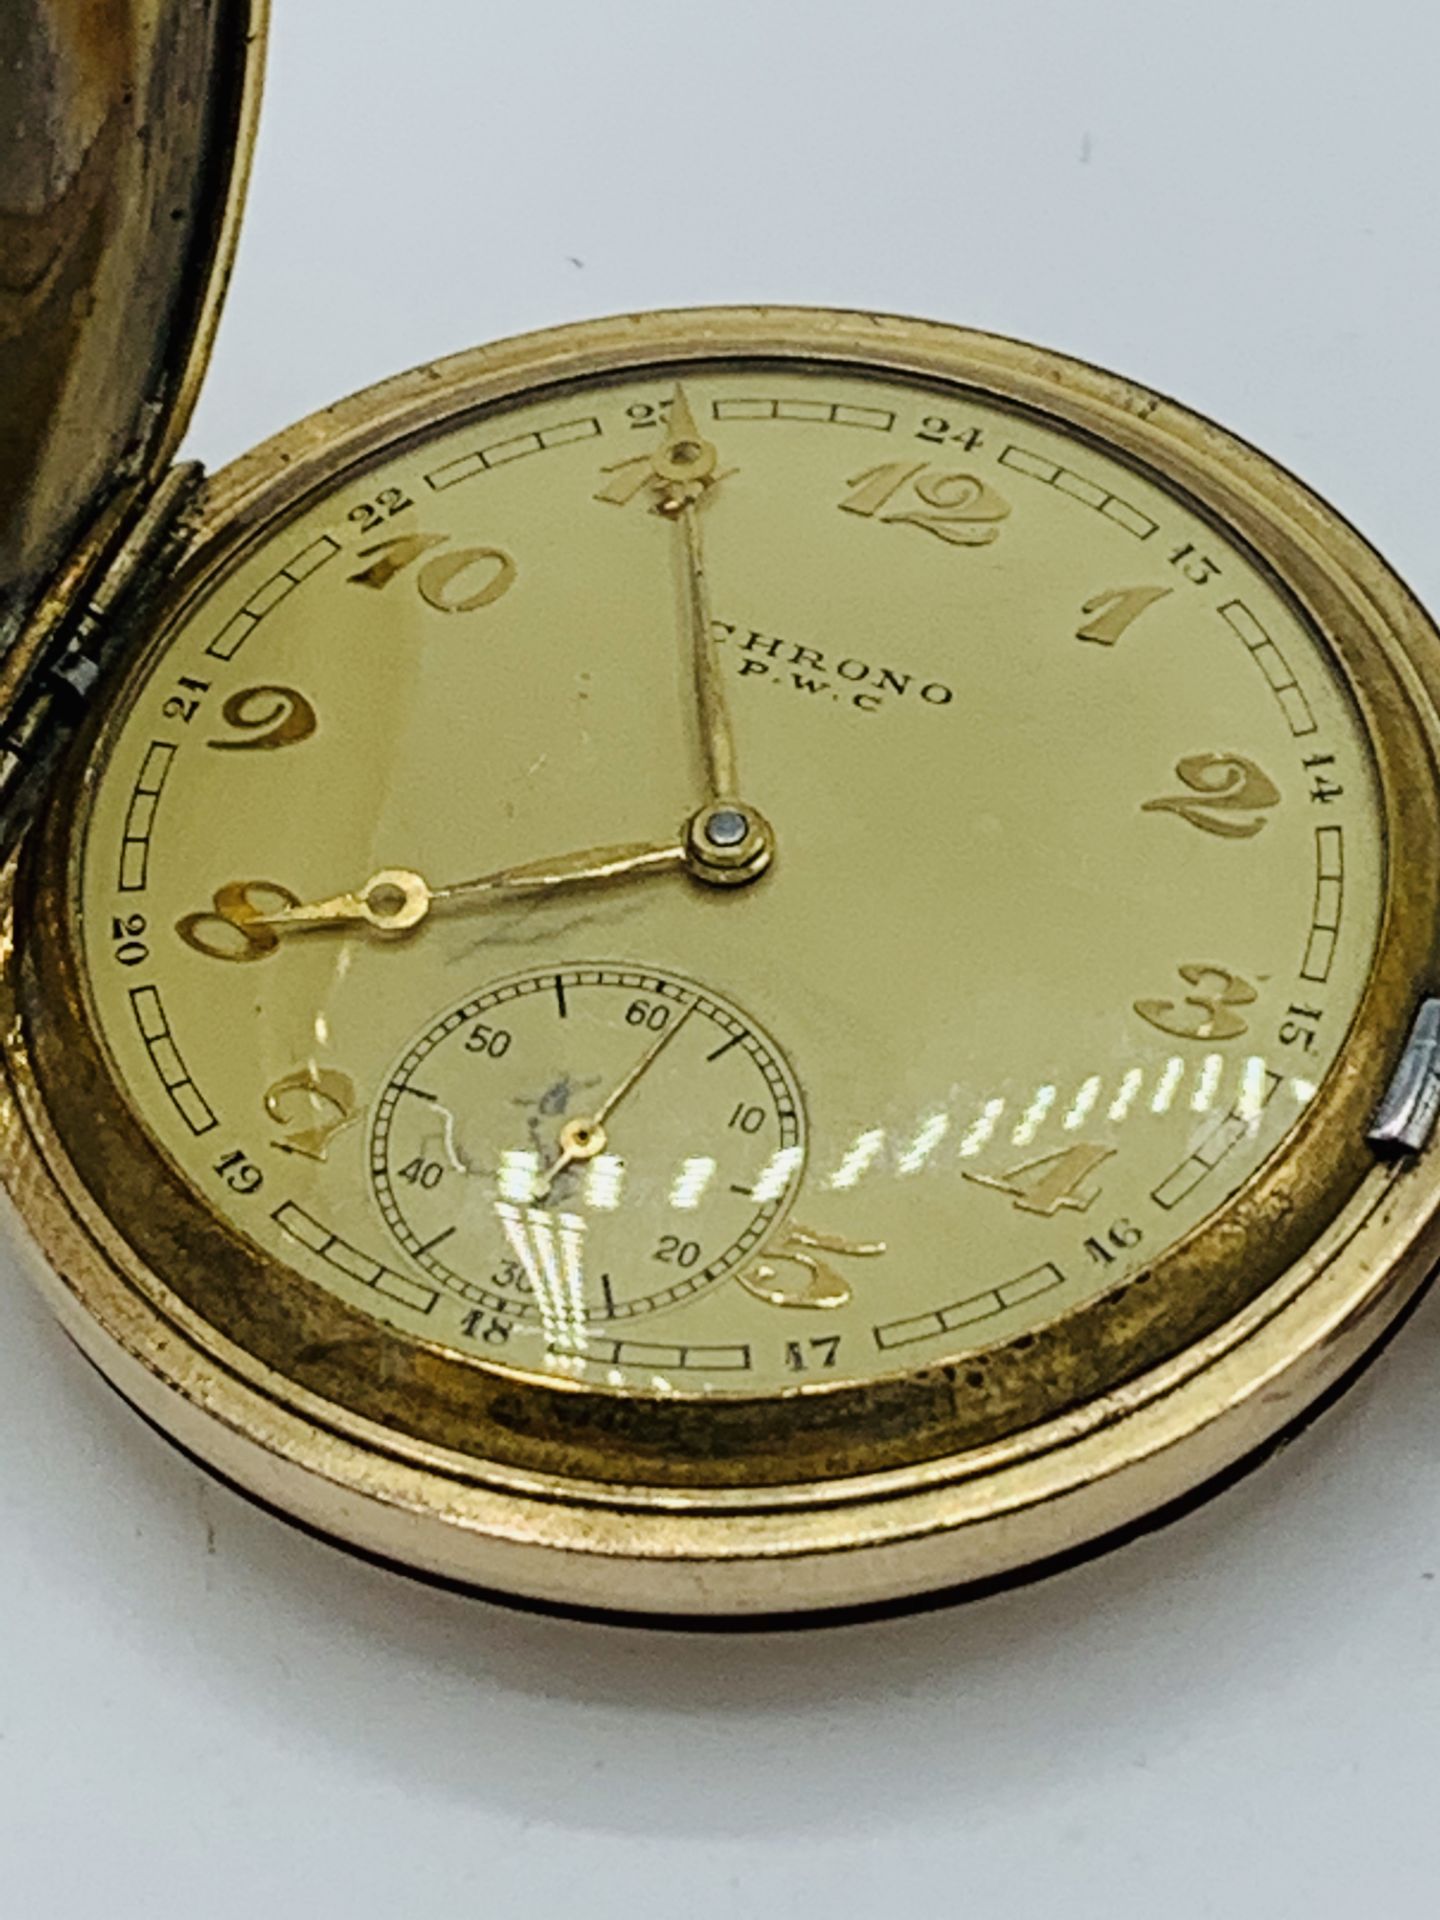 Swiss gold plated case hunter pocket watch, stamped Chrono P.W.C. - Image 2 of 5